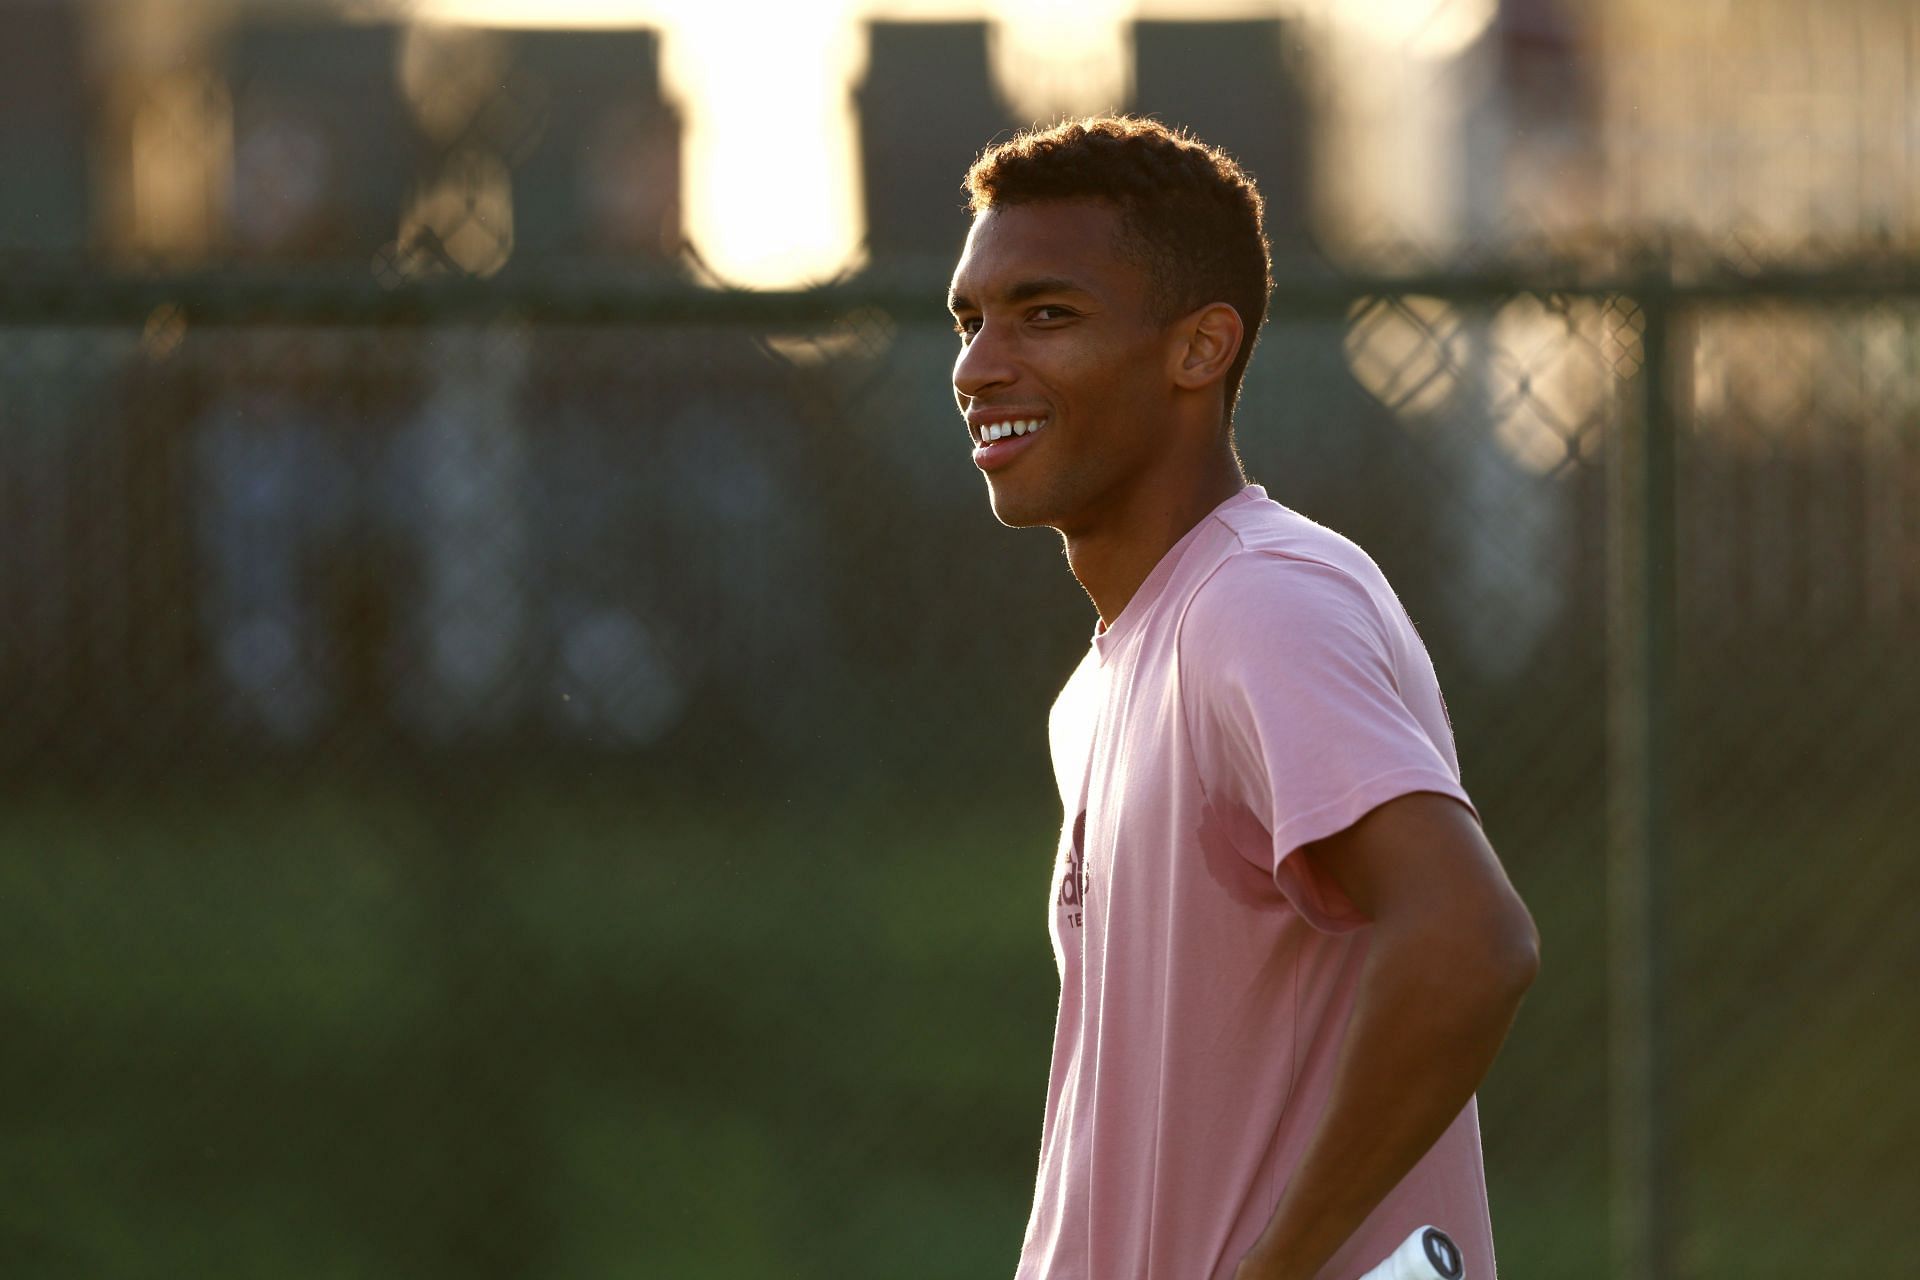 Felix Auger-Aliassime at the 2022 Indian Wells Open